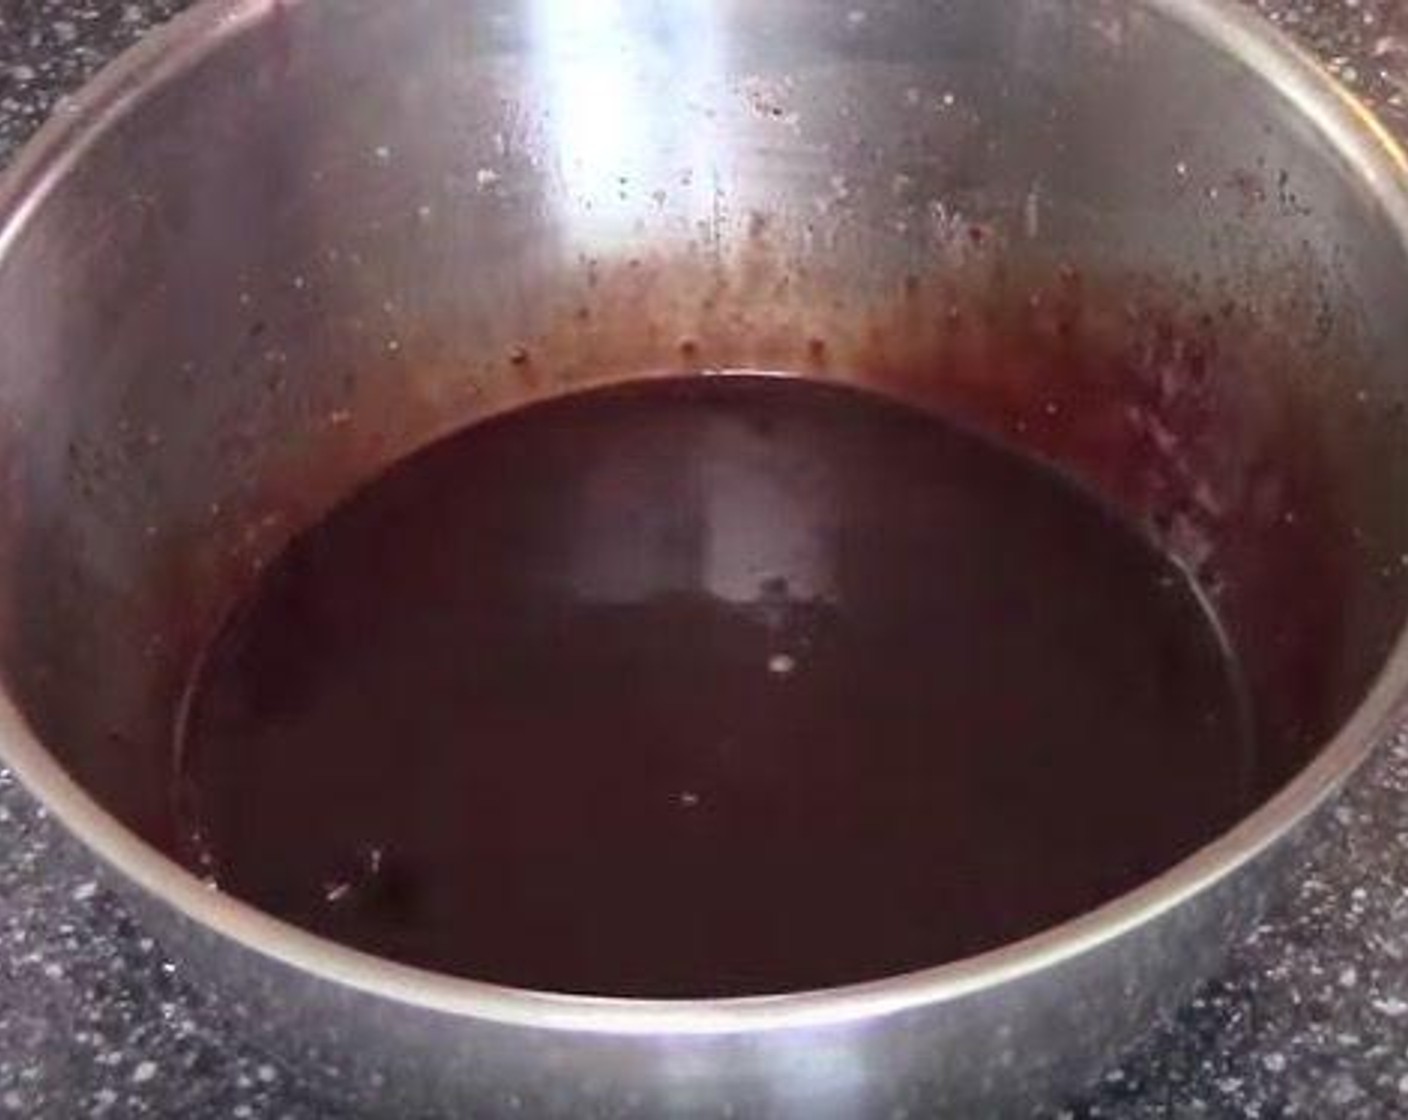 step 2 Make the chocolate icing: Sift Powdered Confectioners Sugar (3 cups) and Unsweetened Cocoa Powder (2 Tbsp) into a large mixing bowl. Add Vanilla Extract (1 tsp) and Water (as needed) and mix everything together.